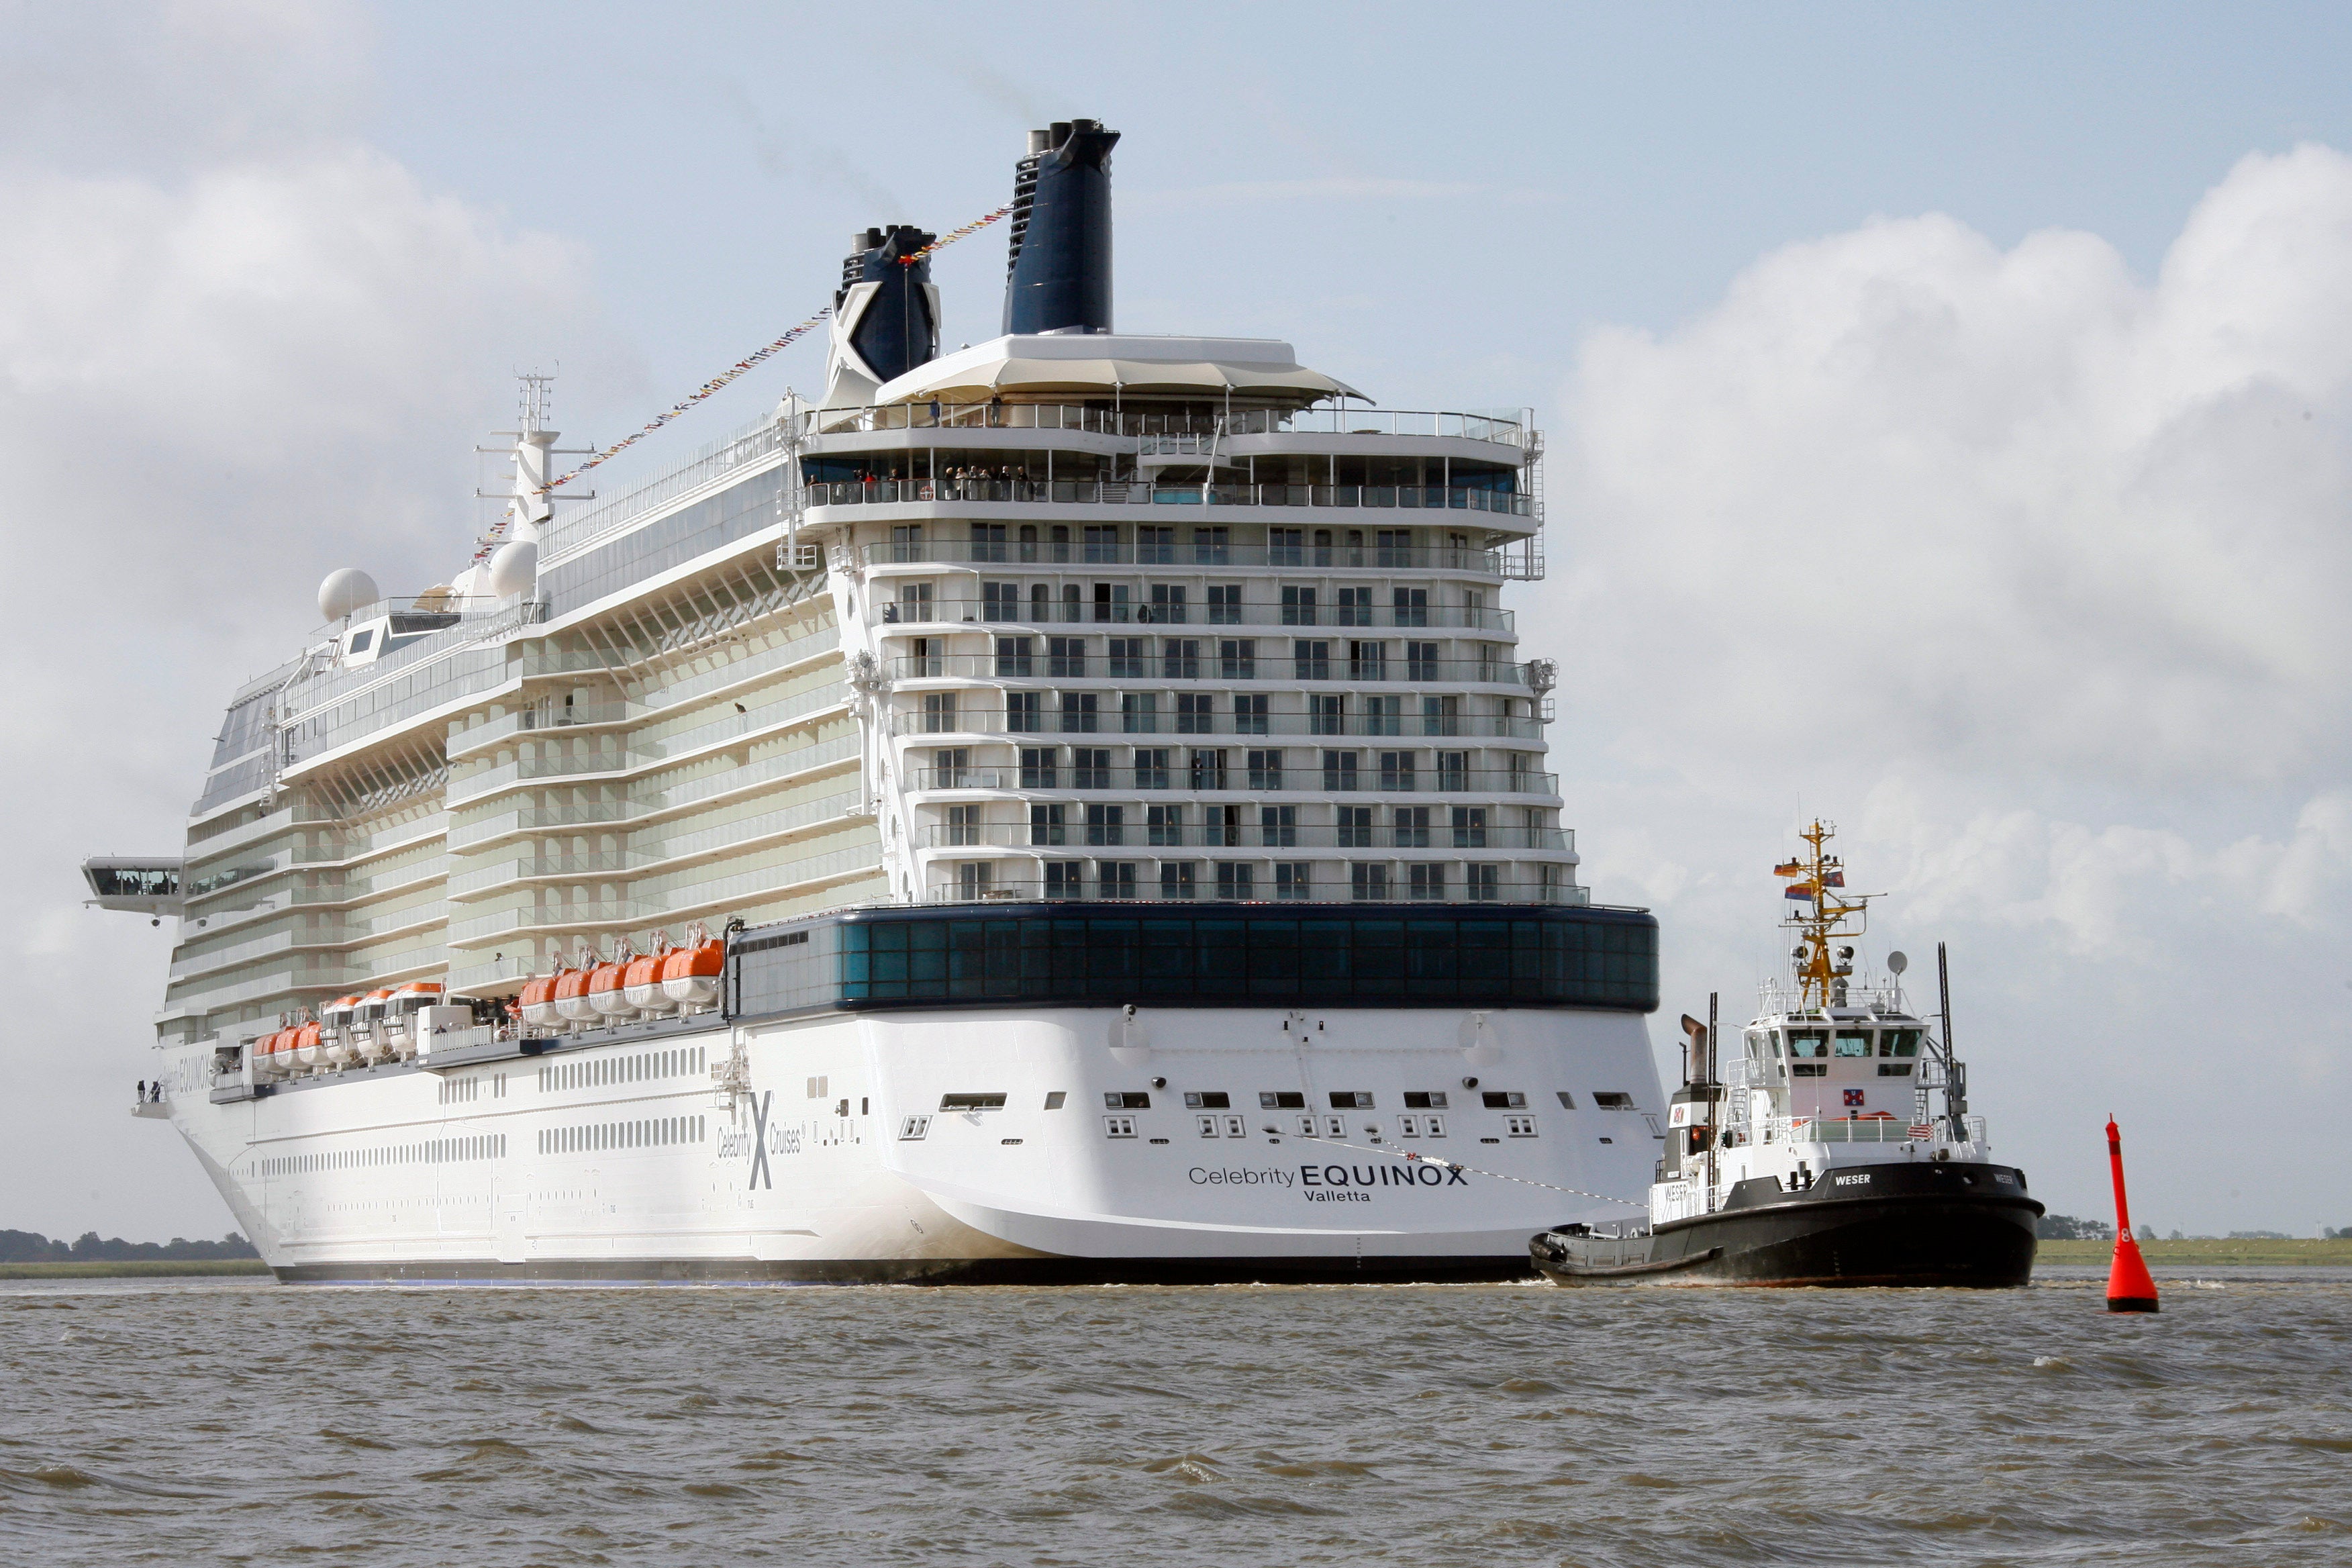 FILE - The cruiser Celebrity Equinox built by the shipyard Meyer in Papenburg, Germany, goes down the river Ems near Gandersum on Saturday, June 20, 2009.